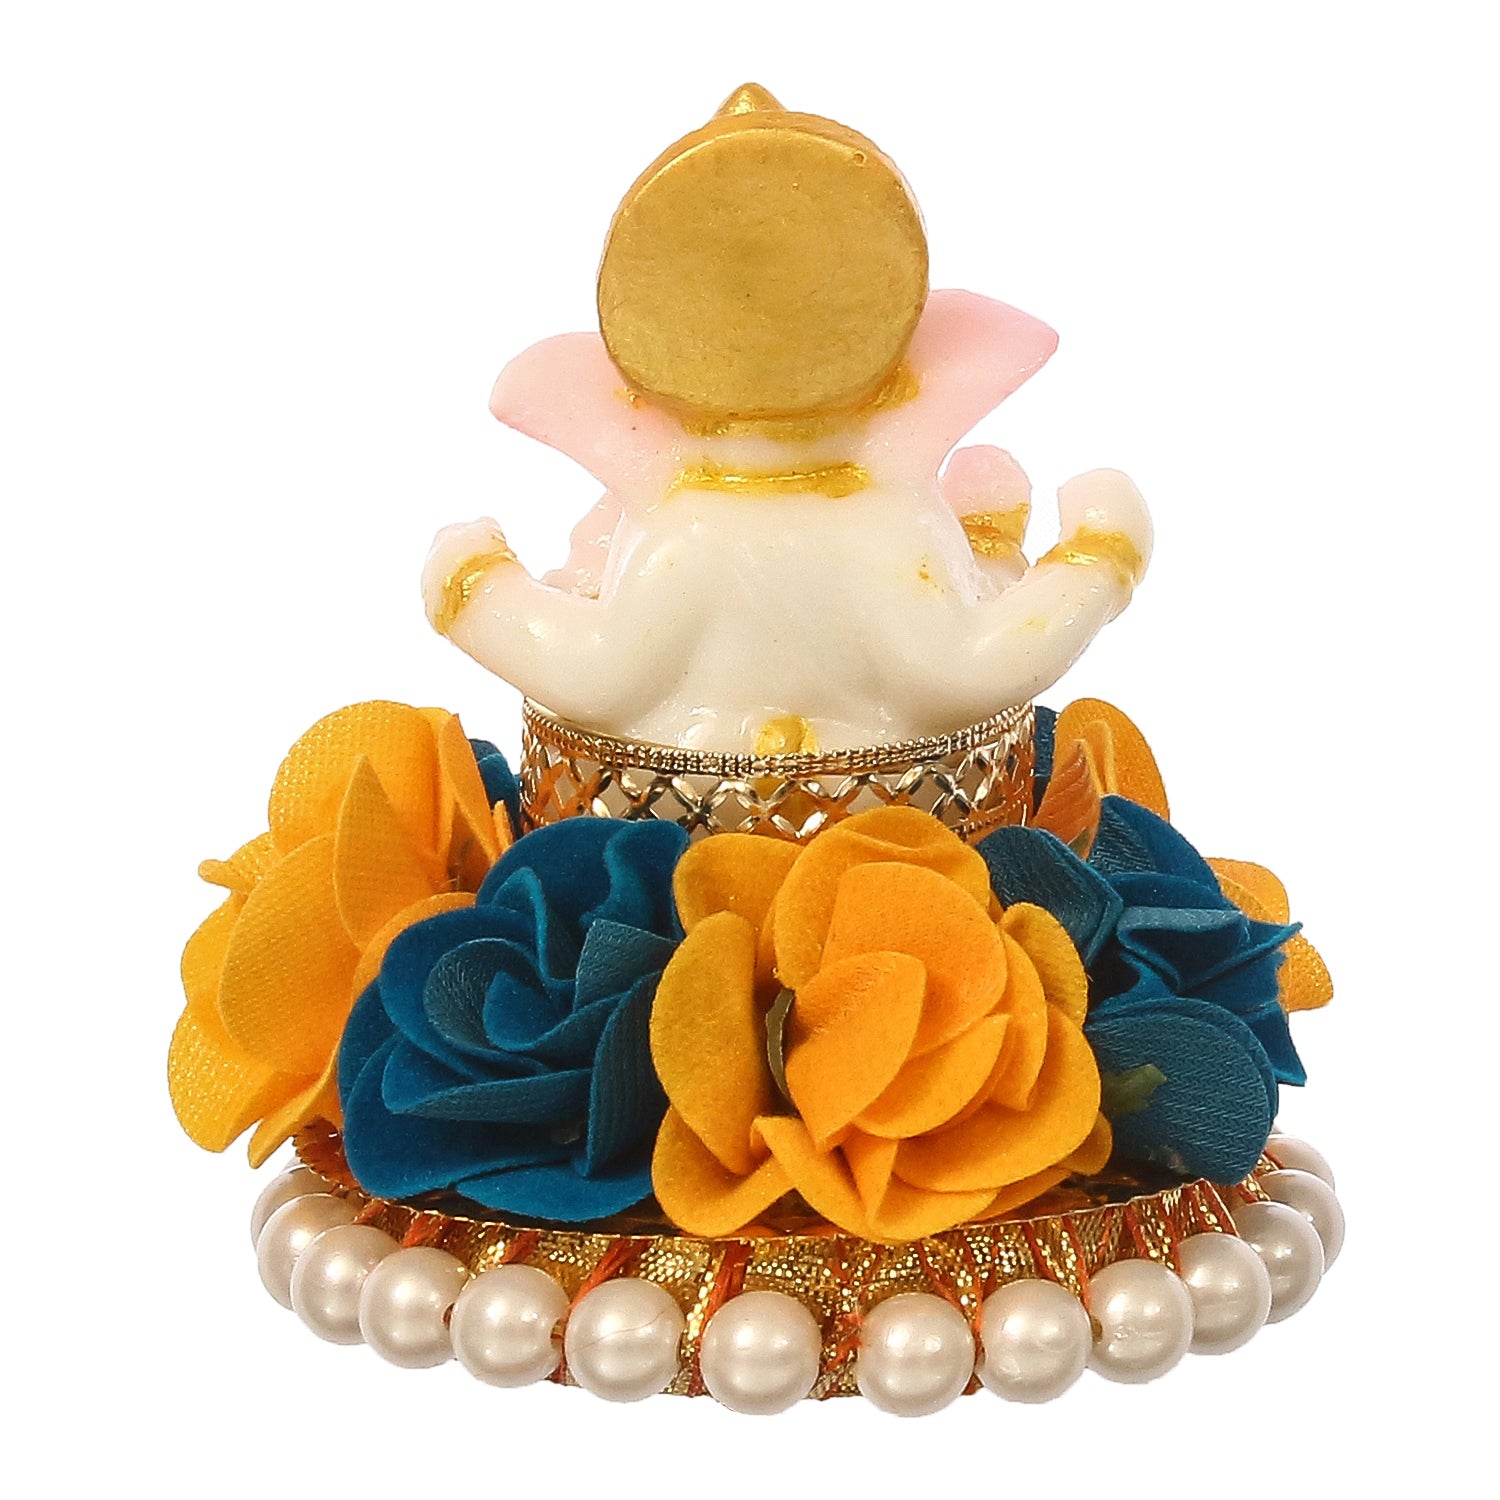 Lord Ganesha Idol on Decorative Handcrafted Plate with Yellow and Blue Flowers 5